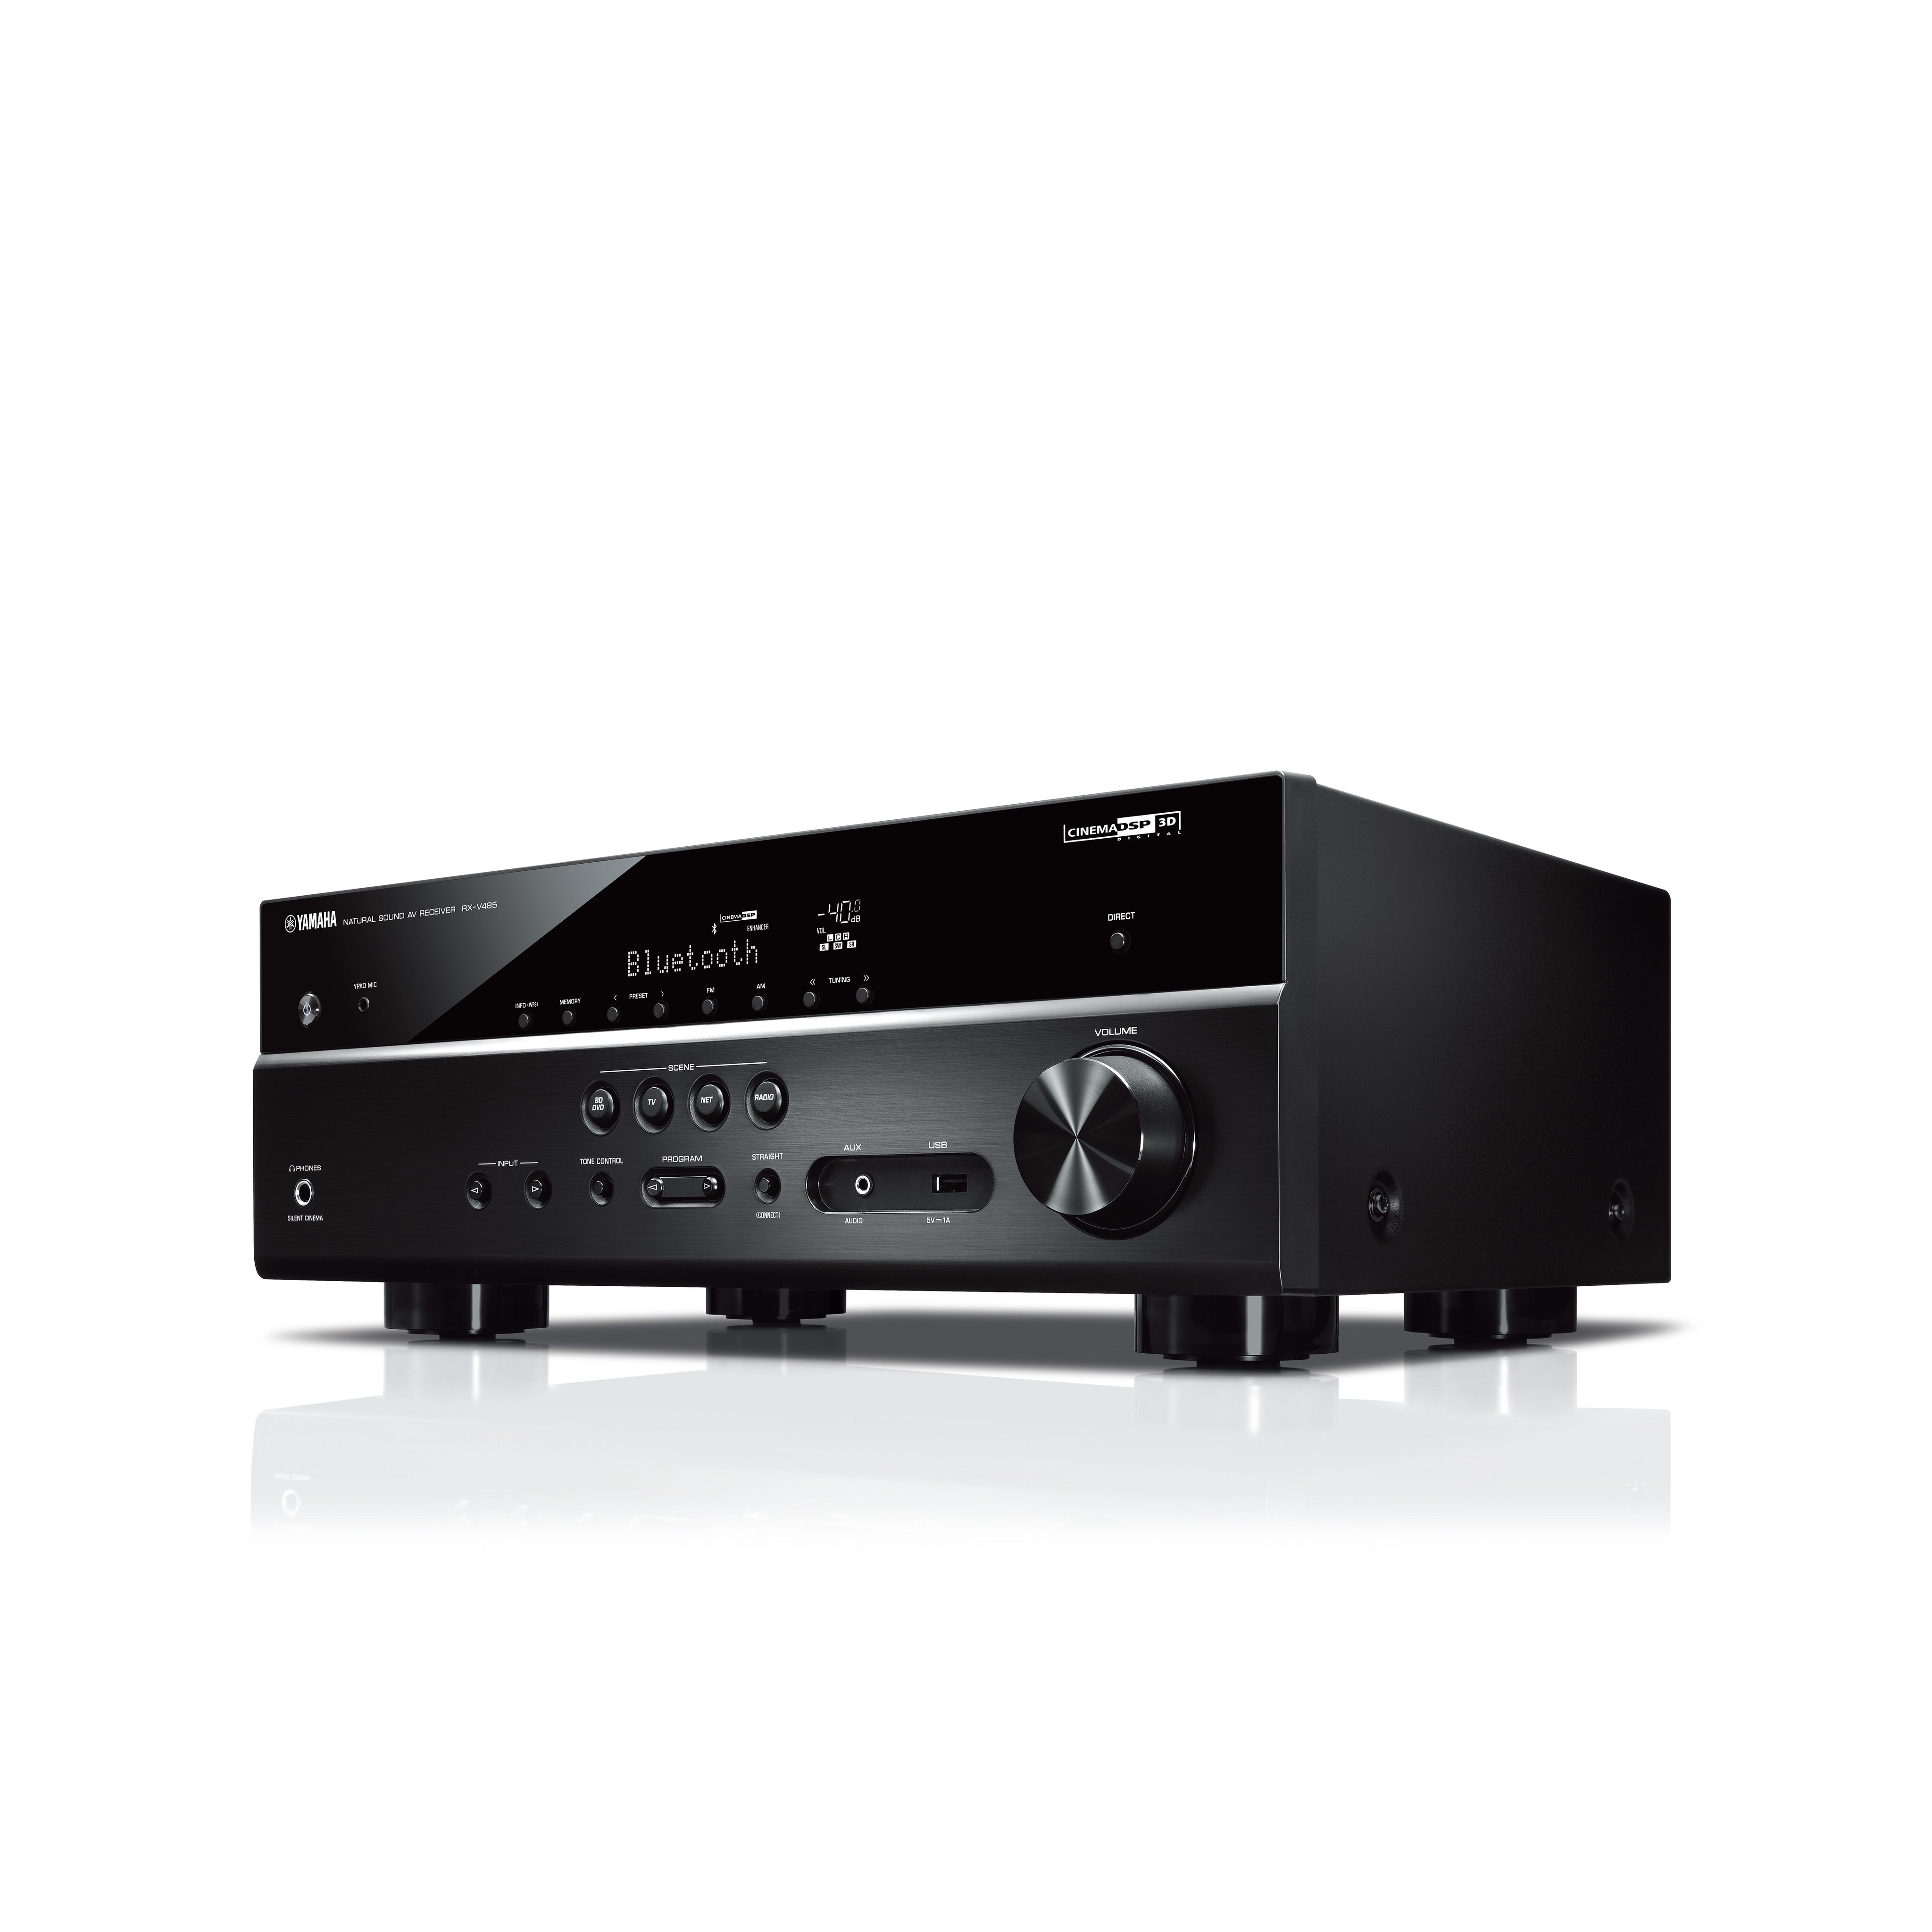 terugvallen Microbe interval RX-V485 - Overview - AV Receivers - Audio & Visual - Products - Yamaha -  Other European Countries